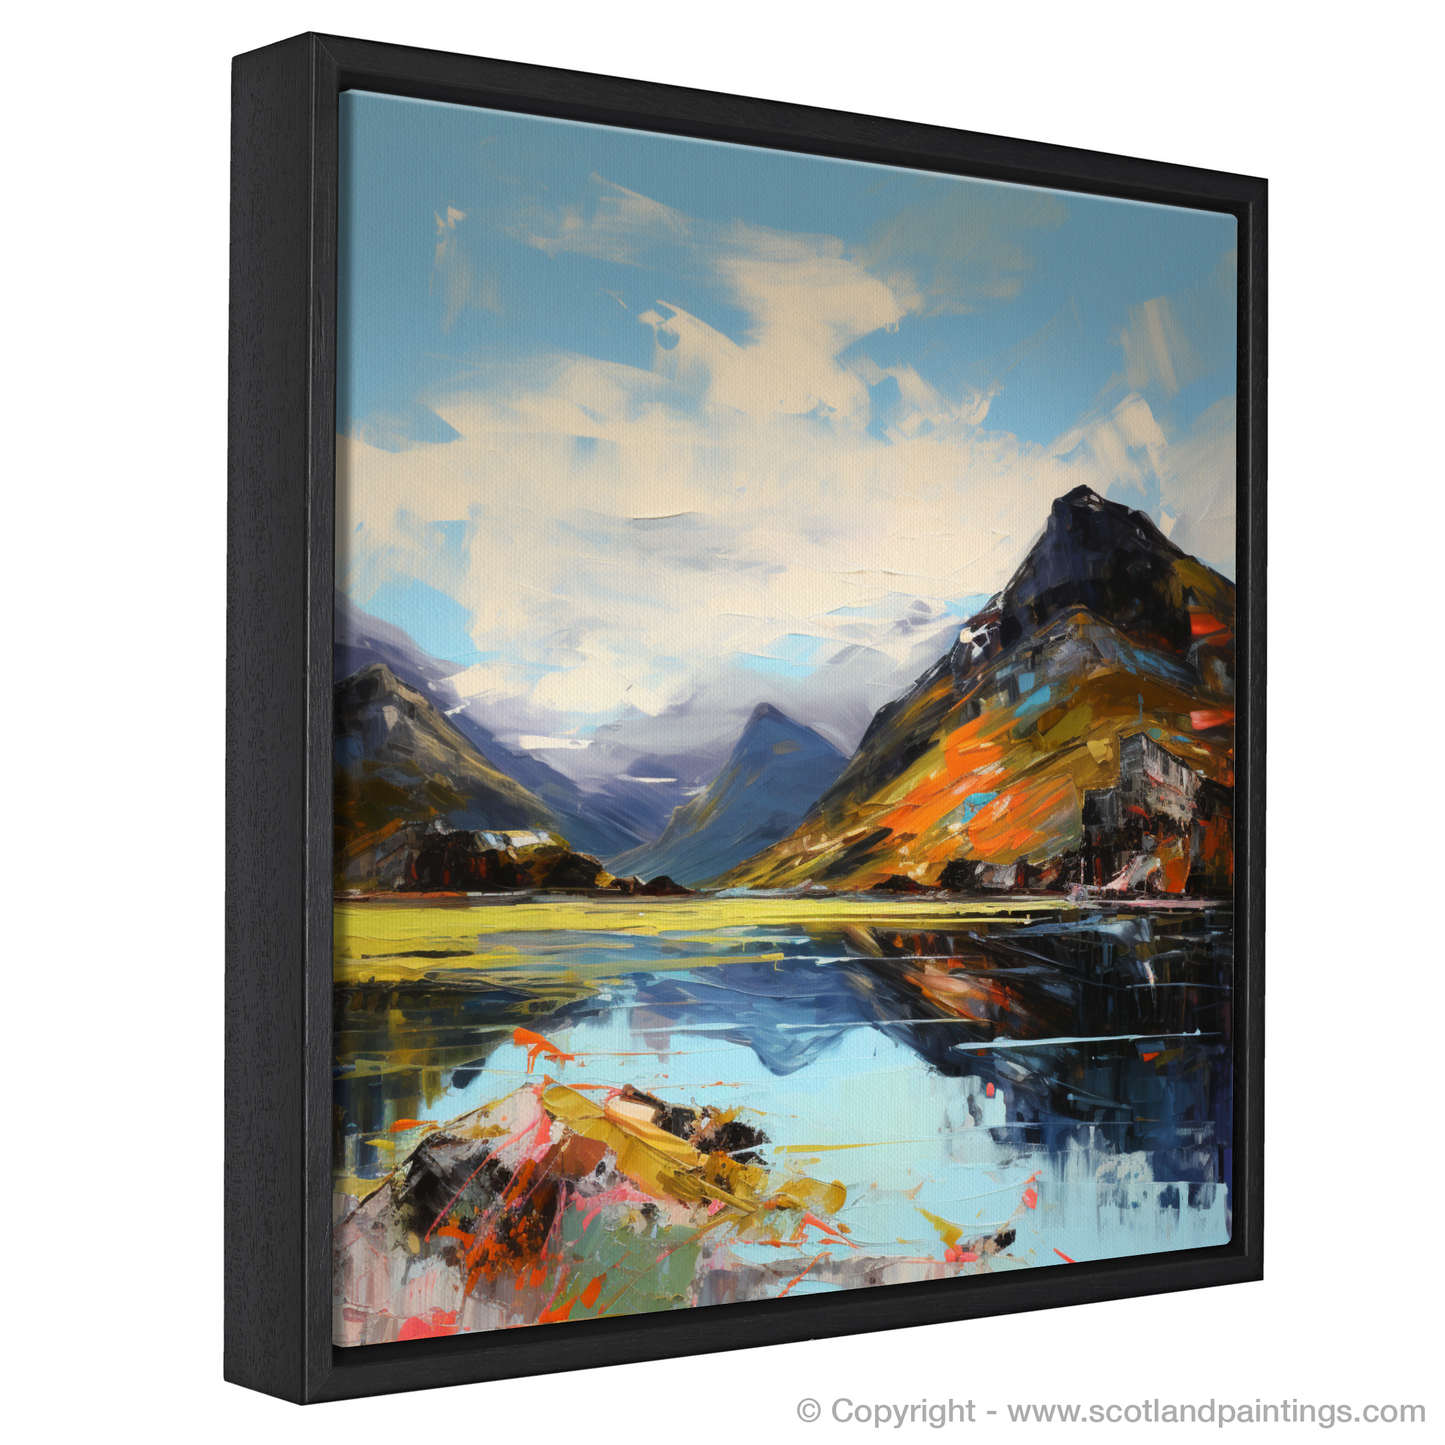 Painting and Art Print of Loch Glencoul, Sutherland entitled "Wild Rhapsody of Loch Glencoul".